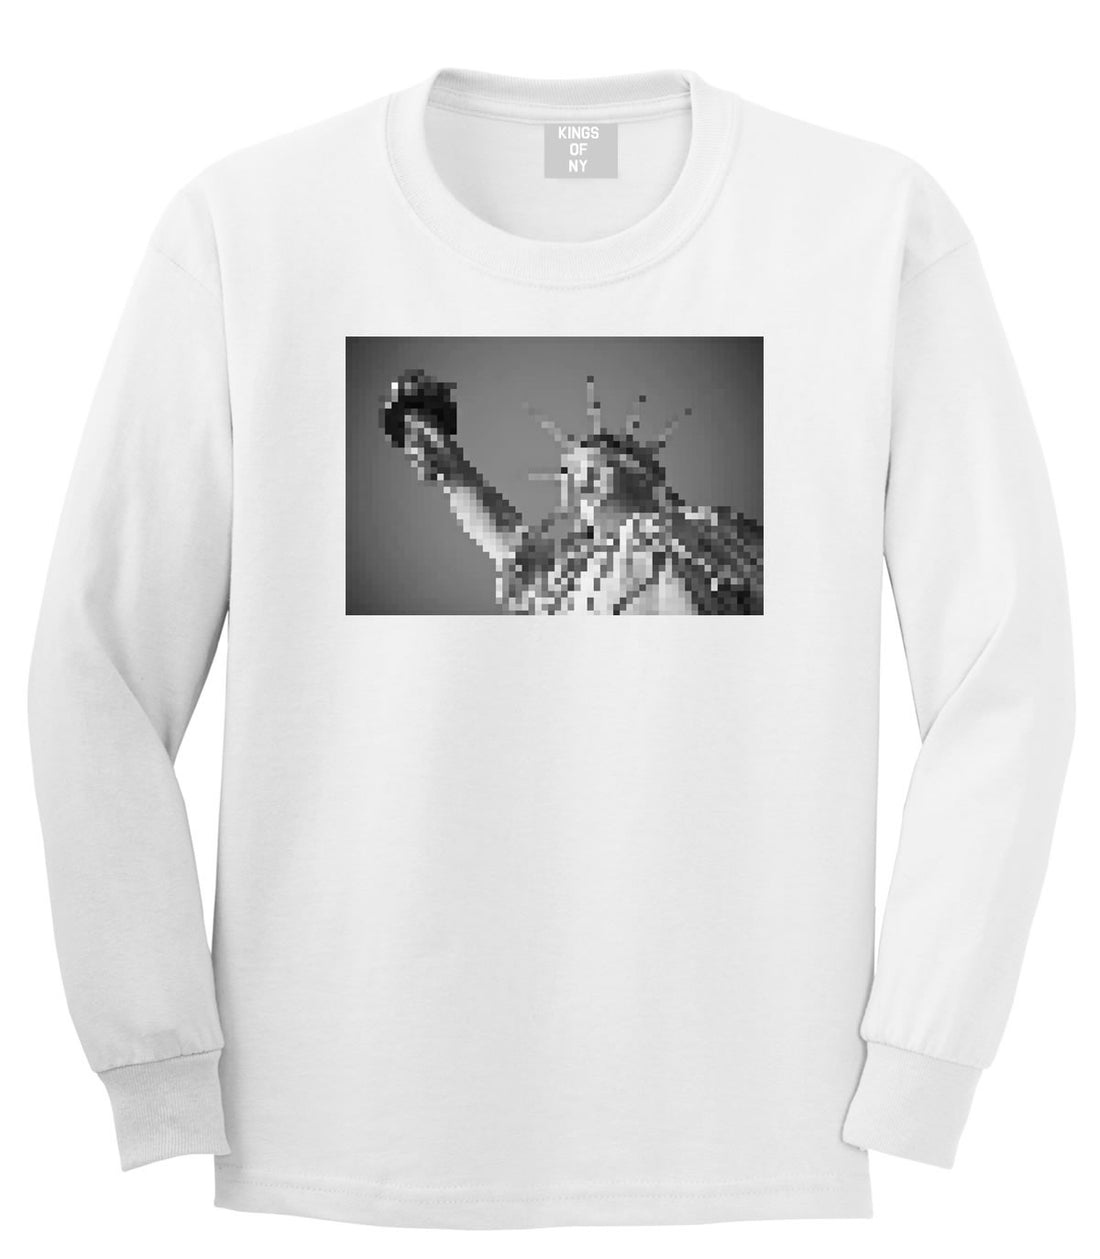 Statue Of Liberty Pixelated Long Sleeve T-Shirt in White by Kings Of NY